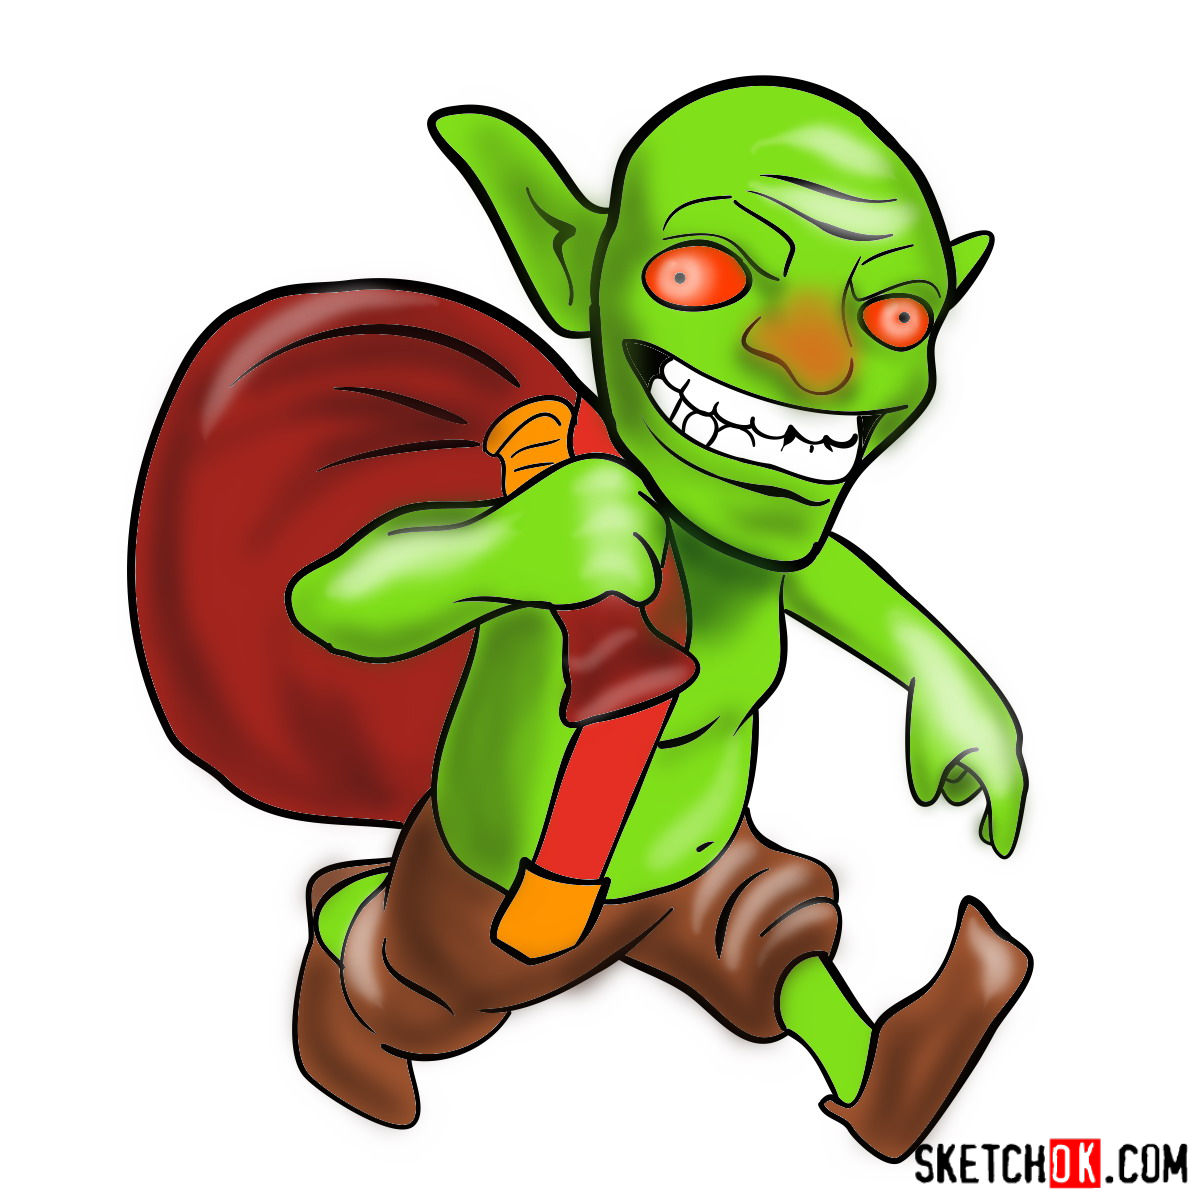 How to draw Goblin from Clash of Clans